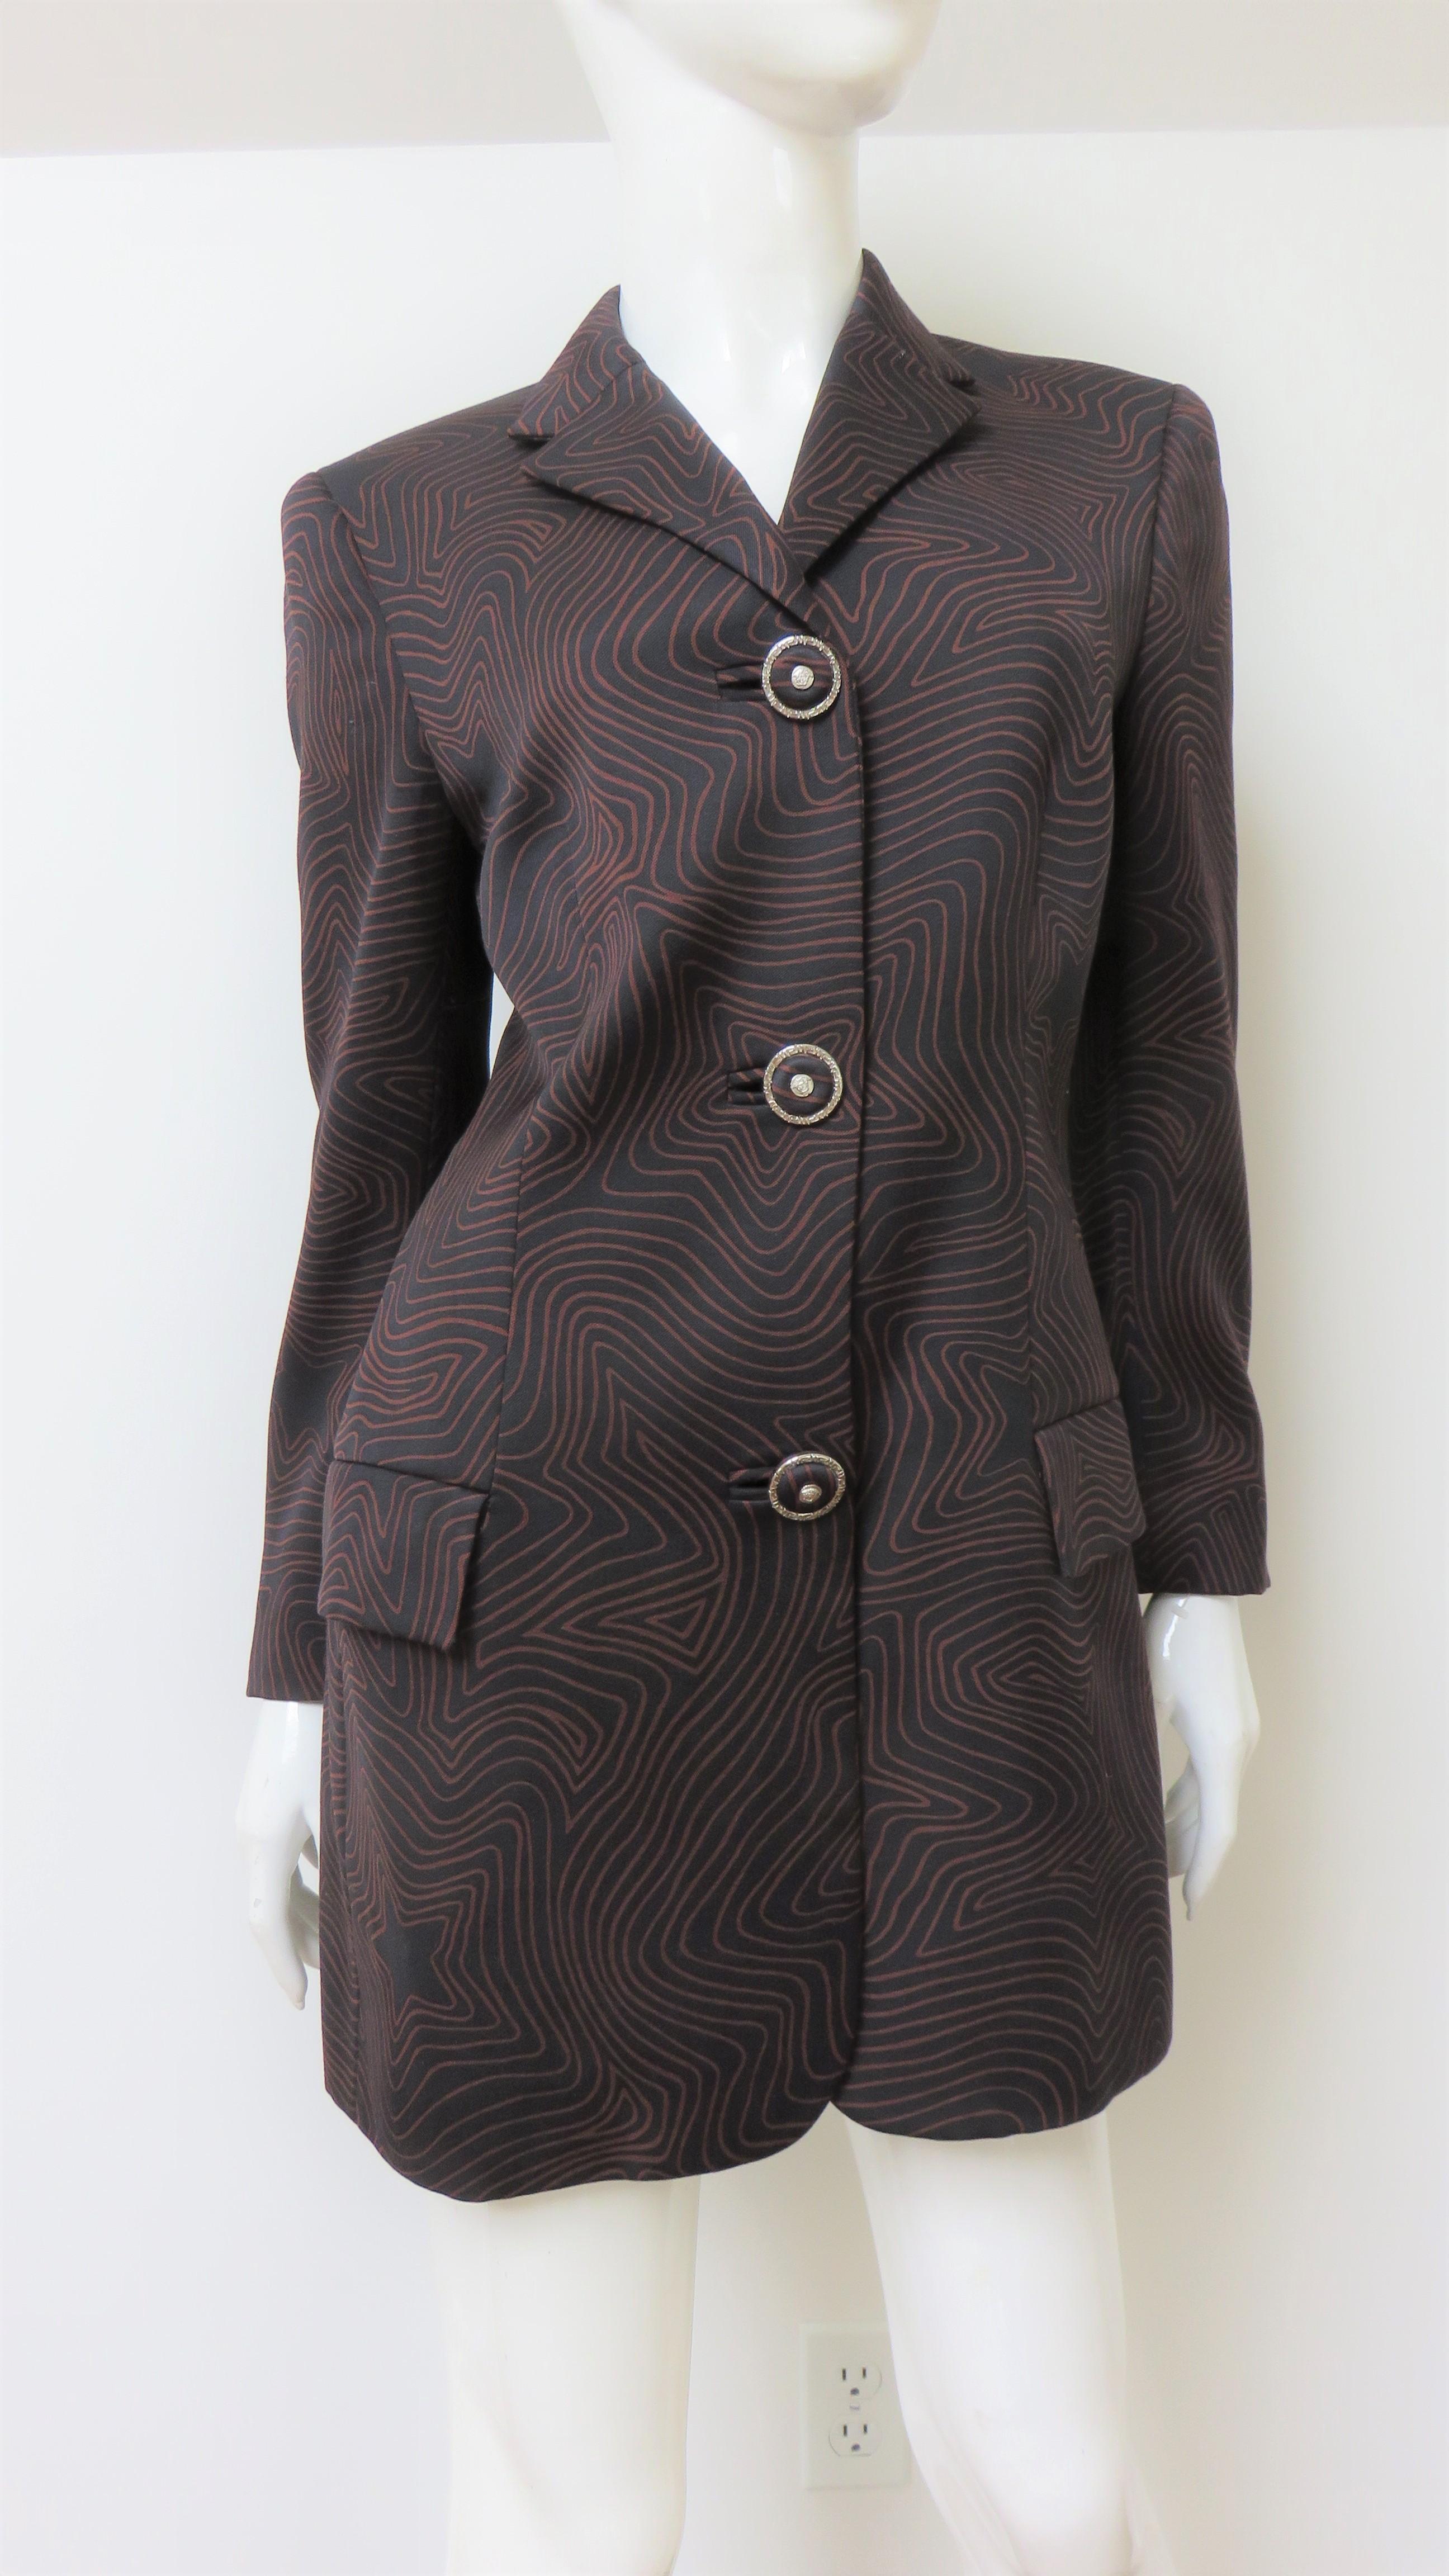 Gianni Versace Silk Lines Jacket 1990s In Excellent Condition For Sale In Water Mill, NY